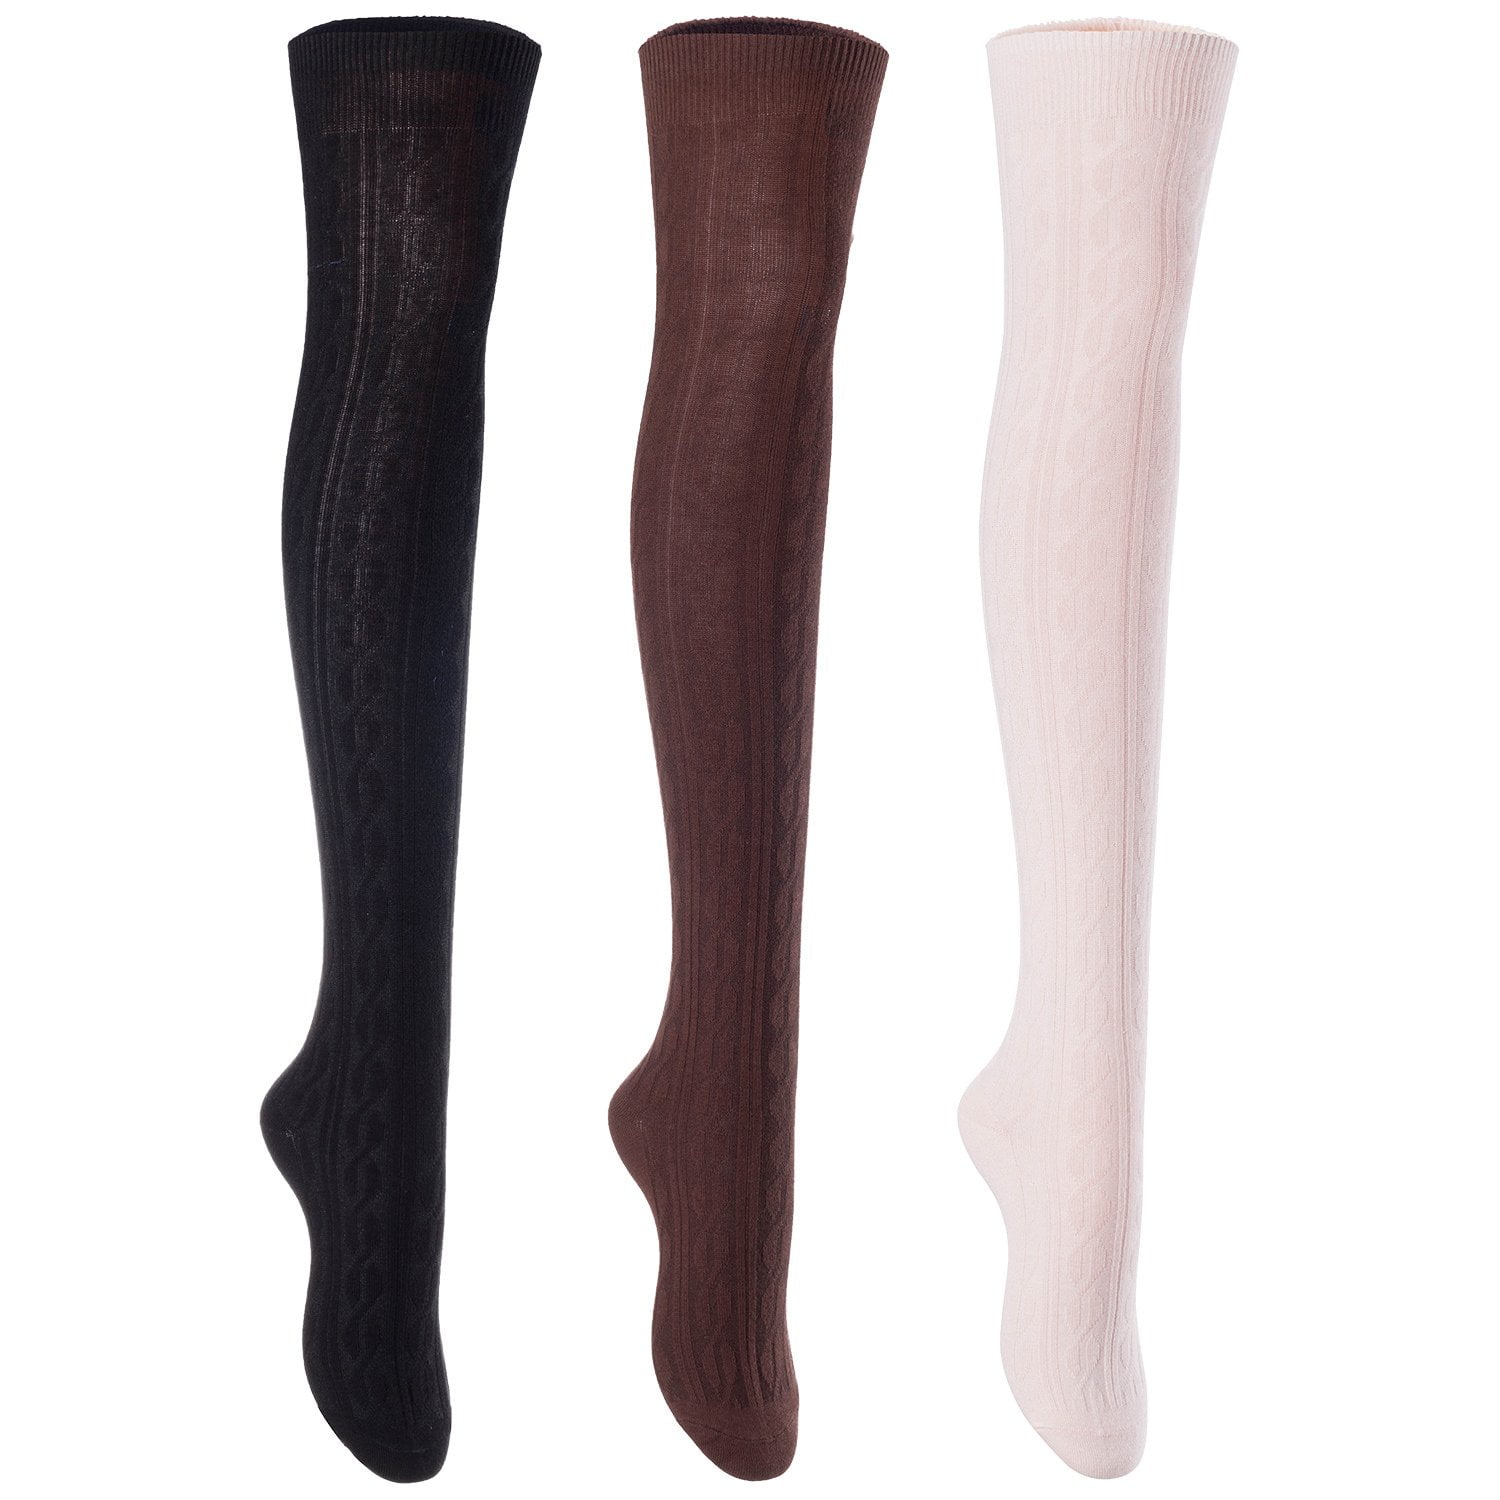 3 Pairs Awesome Women Thigh High Cotton Boot Socks. Durable Knee High ...